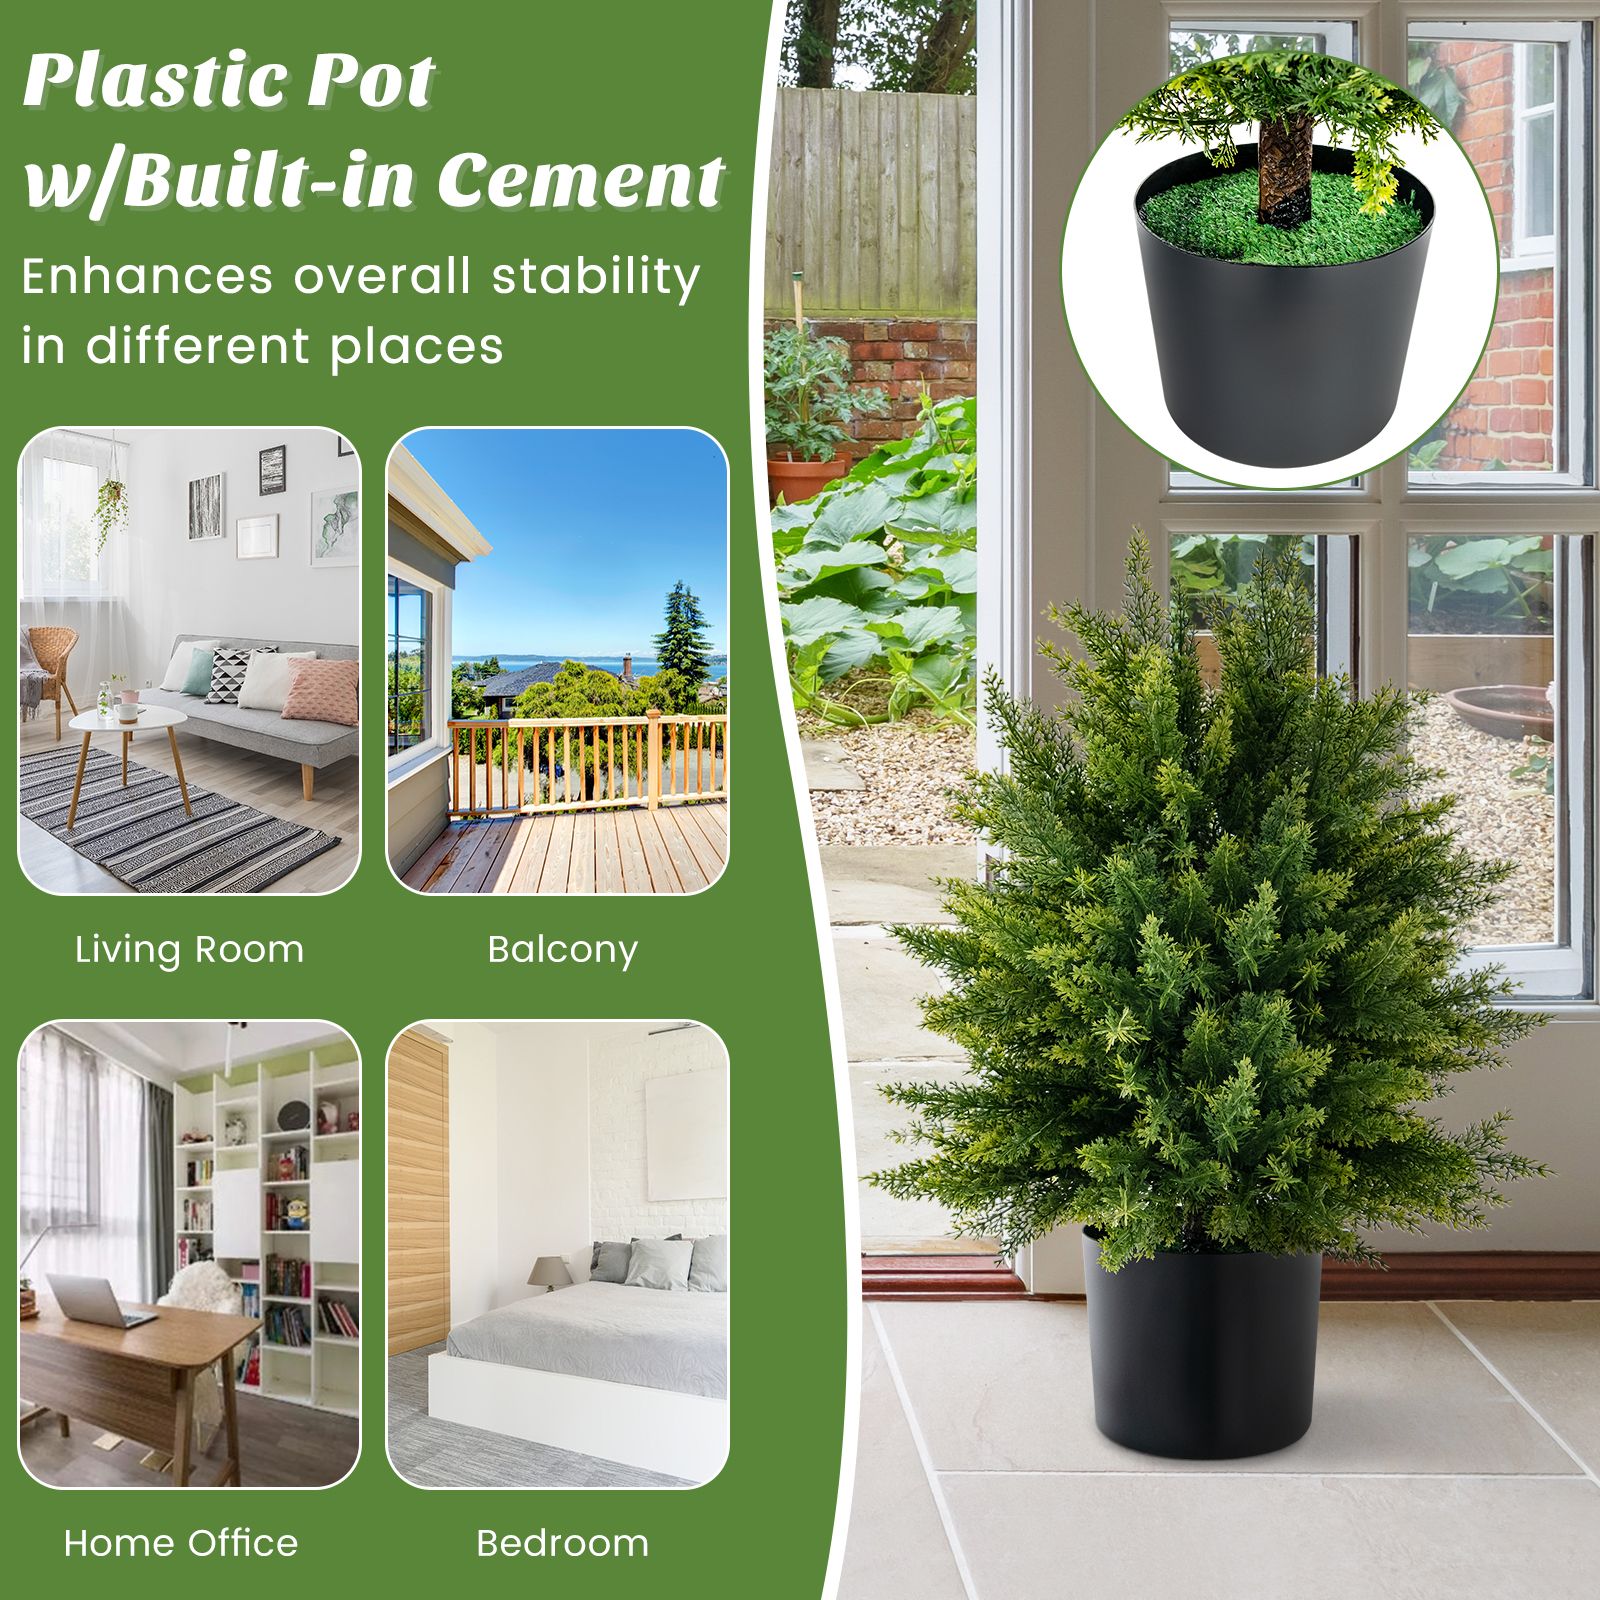 Set of 2 Artificial Cedar Topiary Ball Trees with Cement Pot